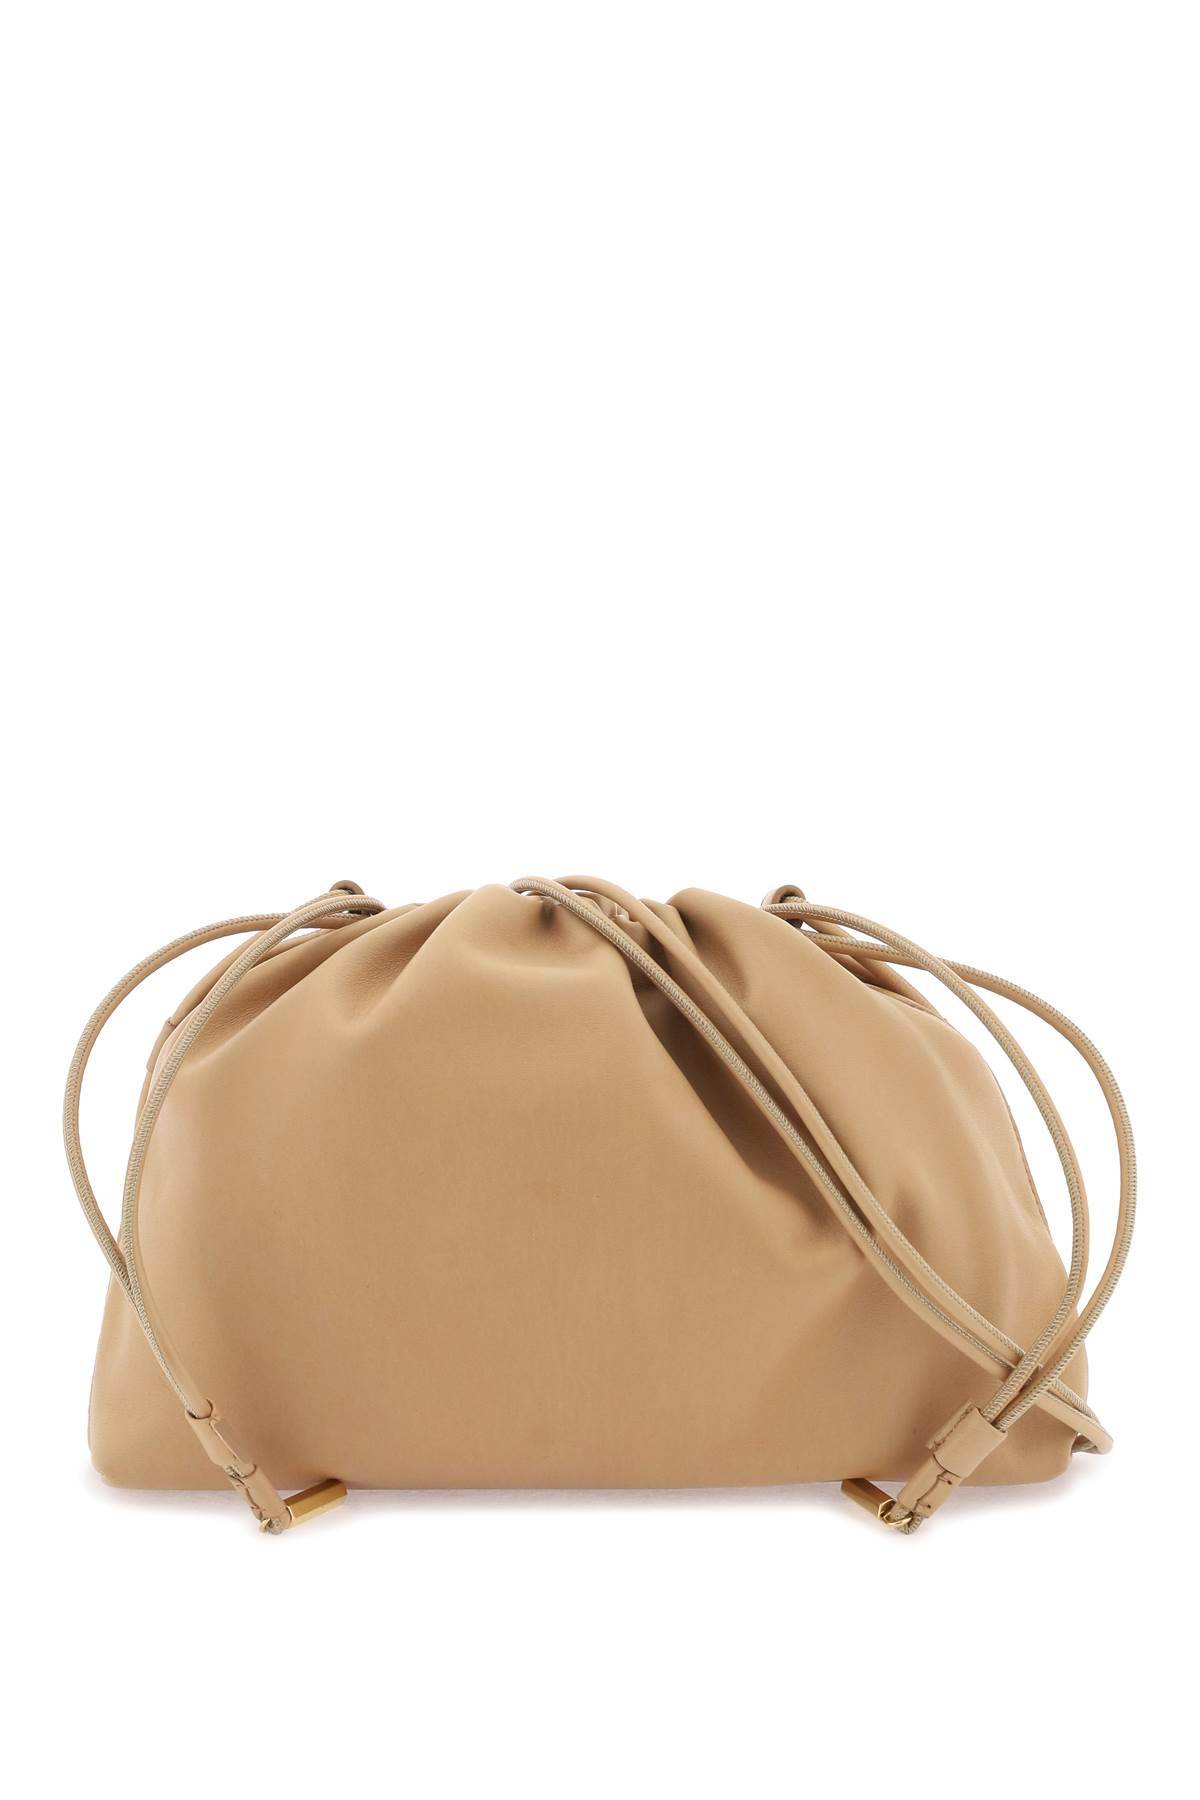 The Row THE ROW "angy shoulder bag with ruffles